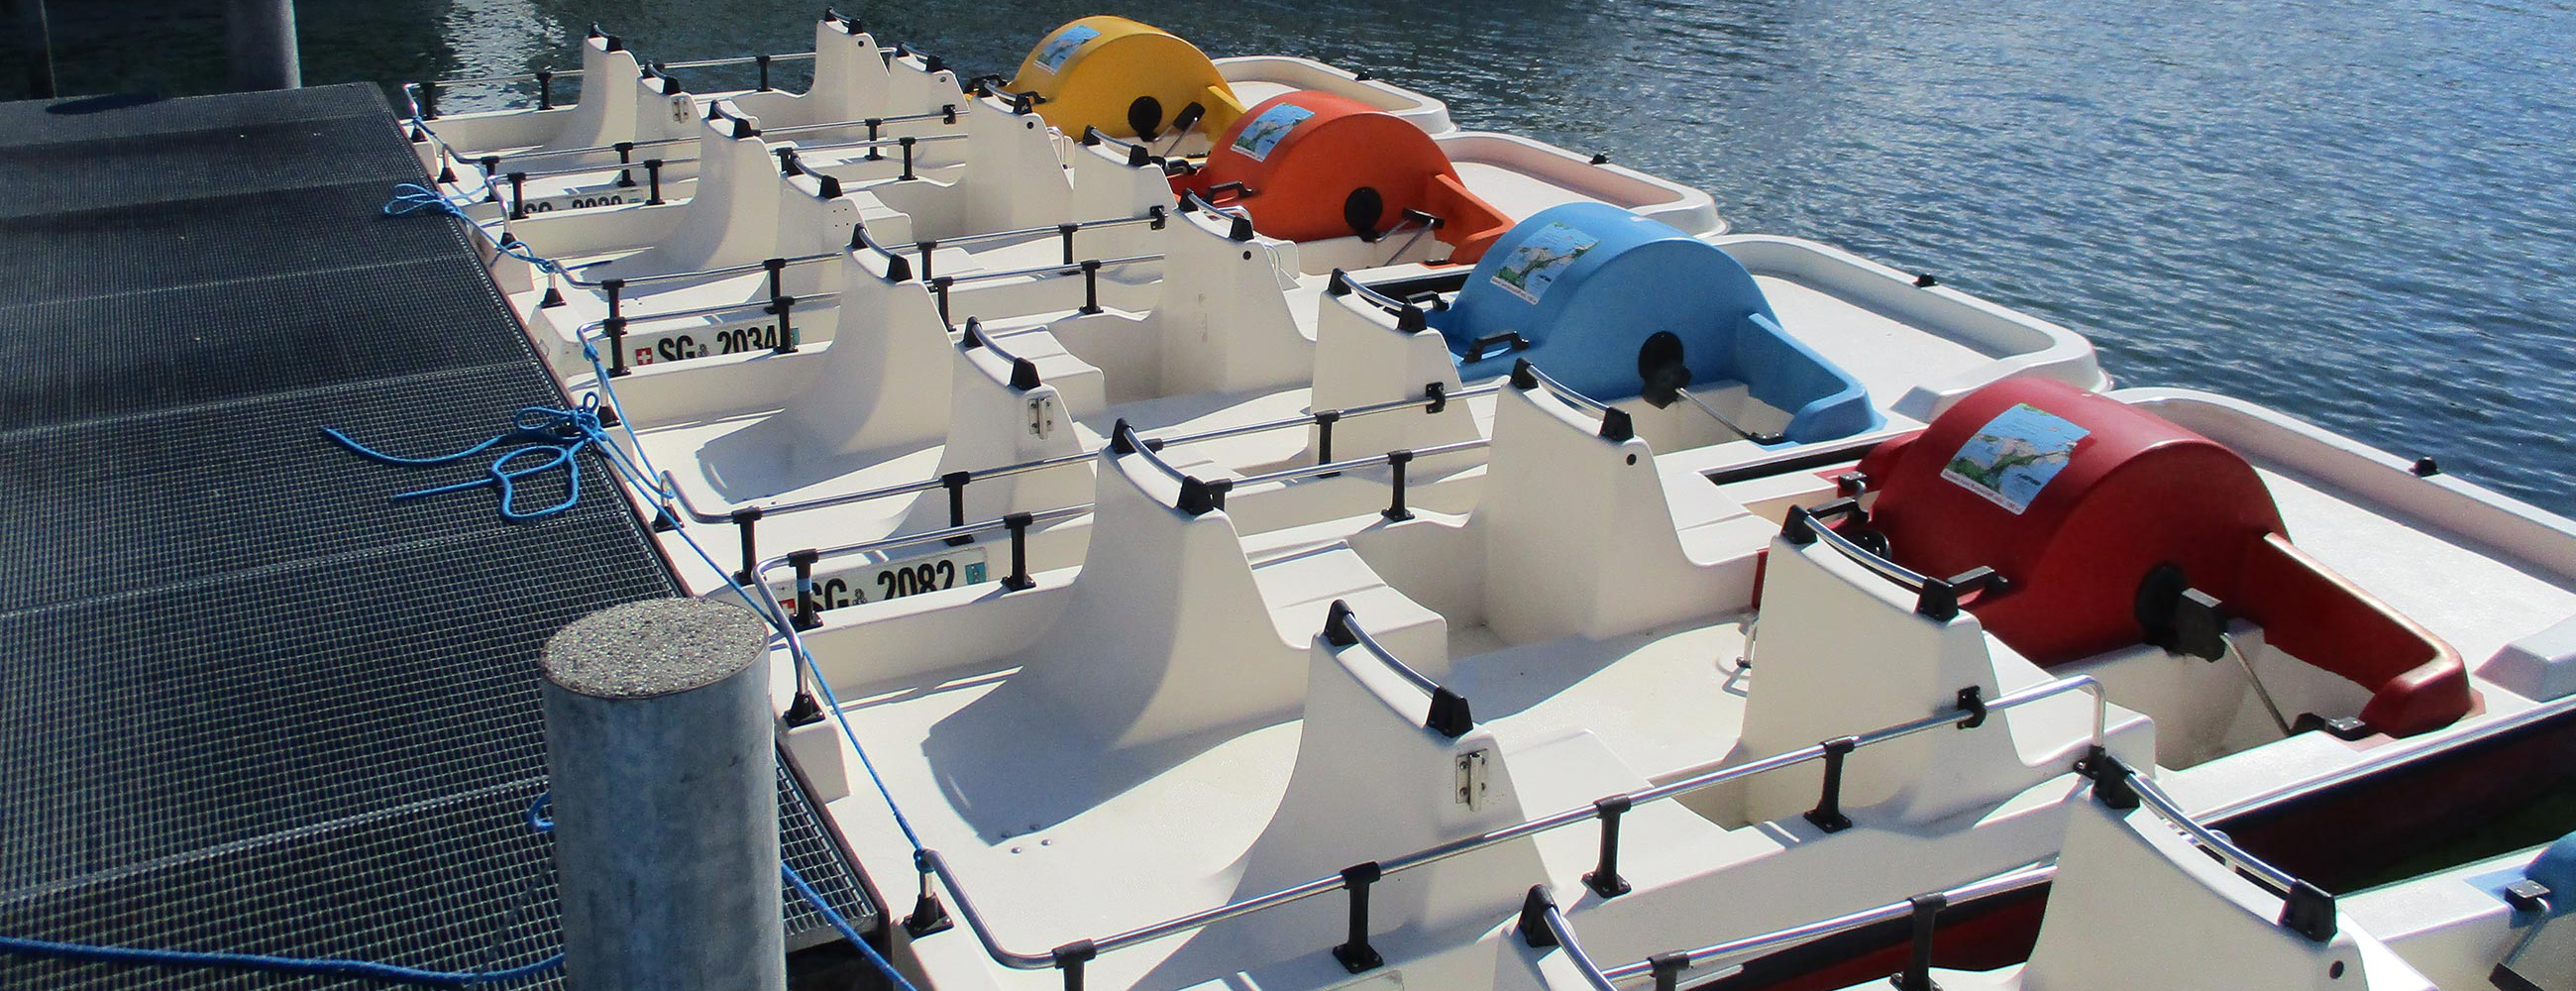 pedalo-hensa-werft-rapperswil-05